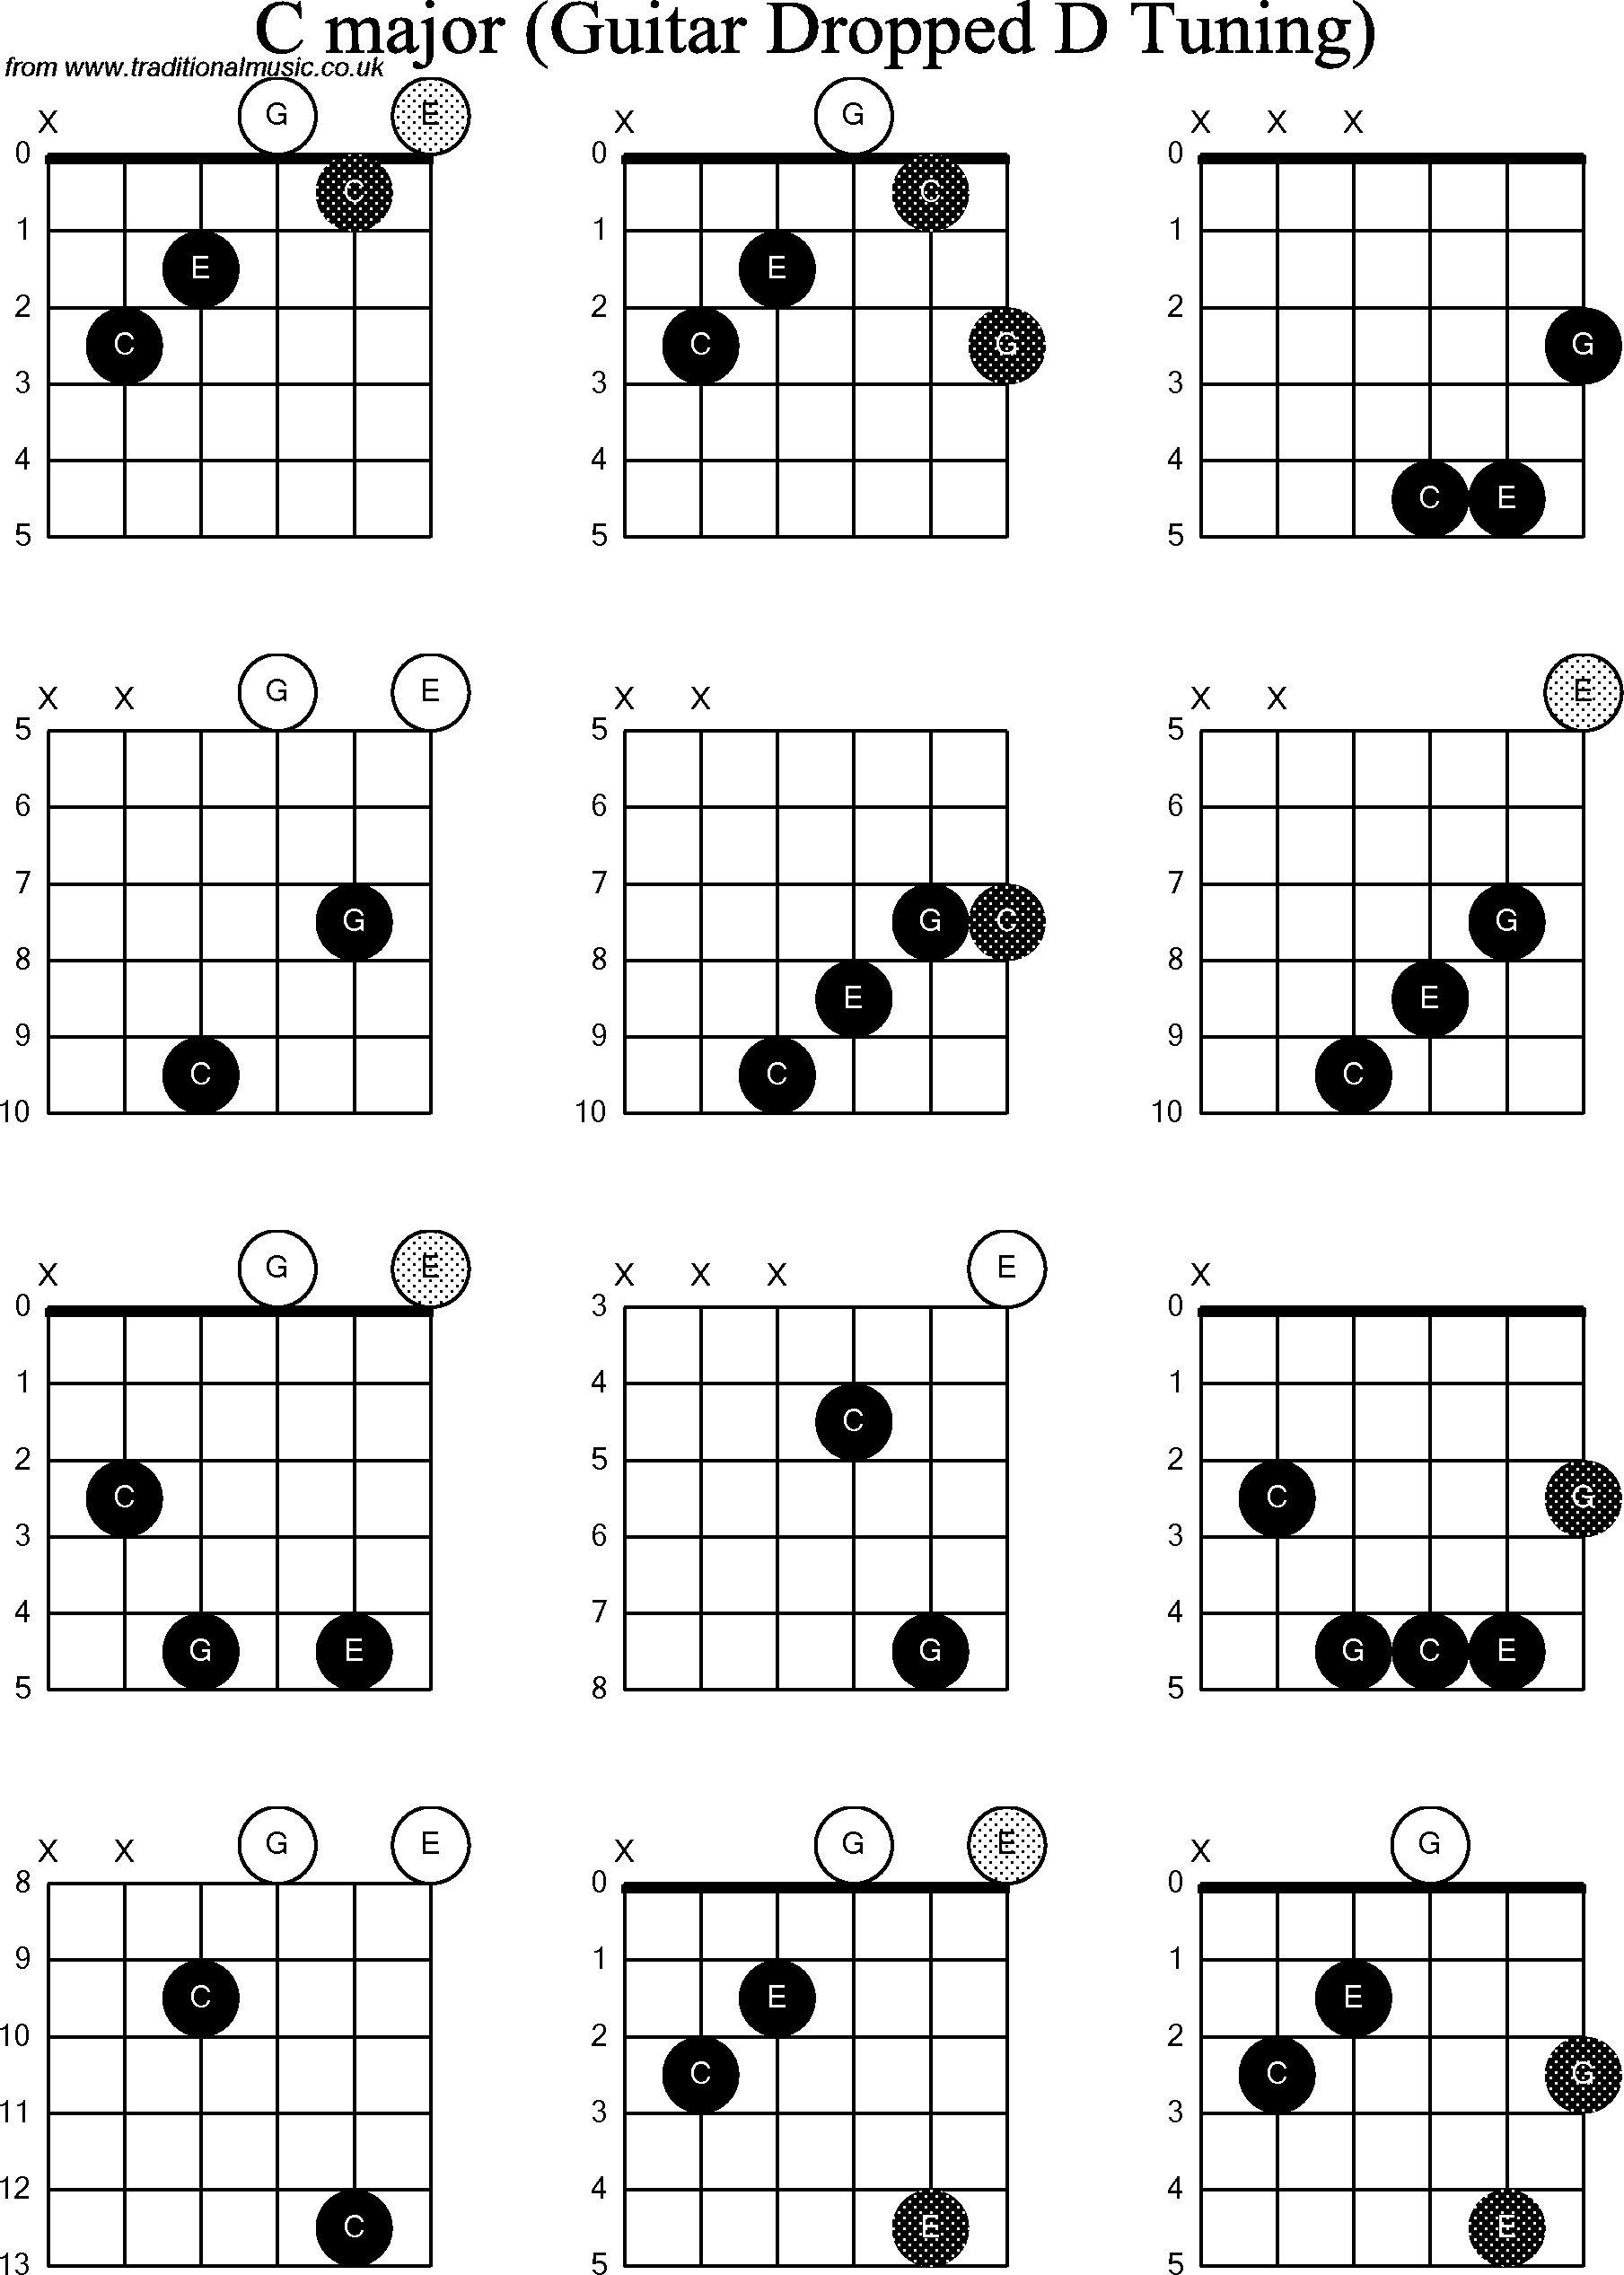 Chord diagrams for dropped D Guitar(DADGBE), C